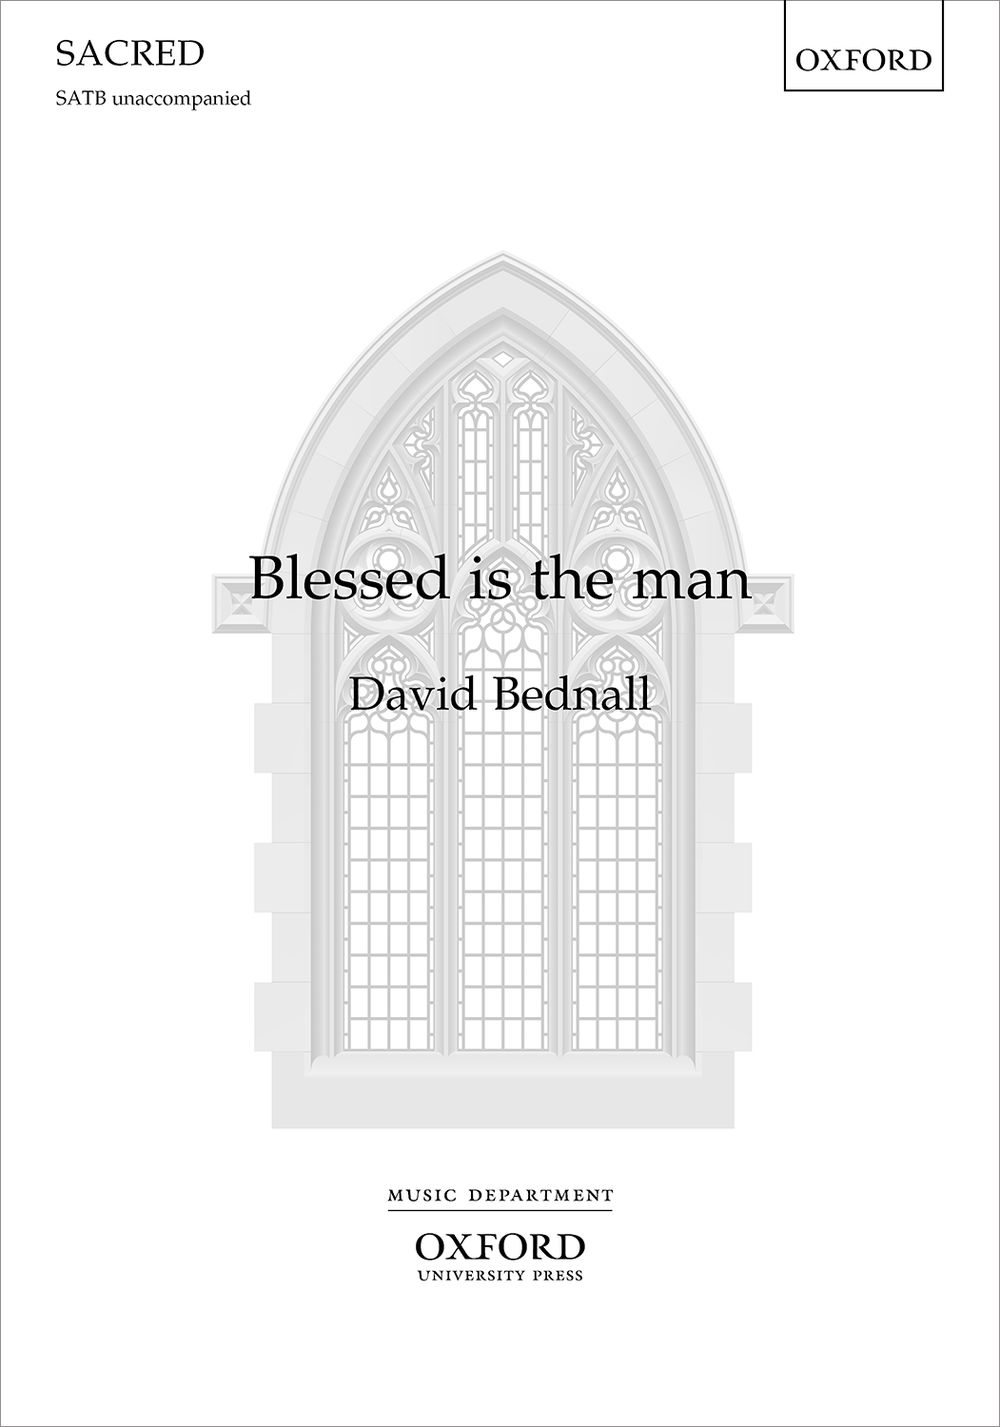 David Bednall: Blessed is the man: SATB: Vocal Score